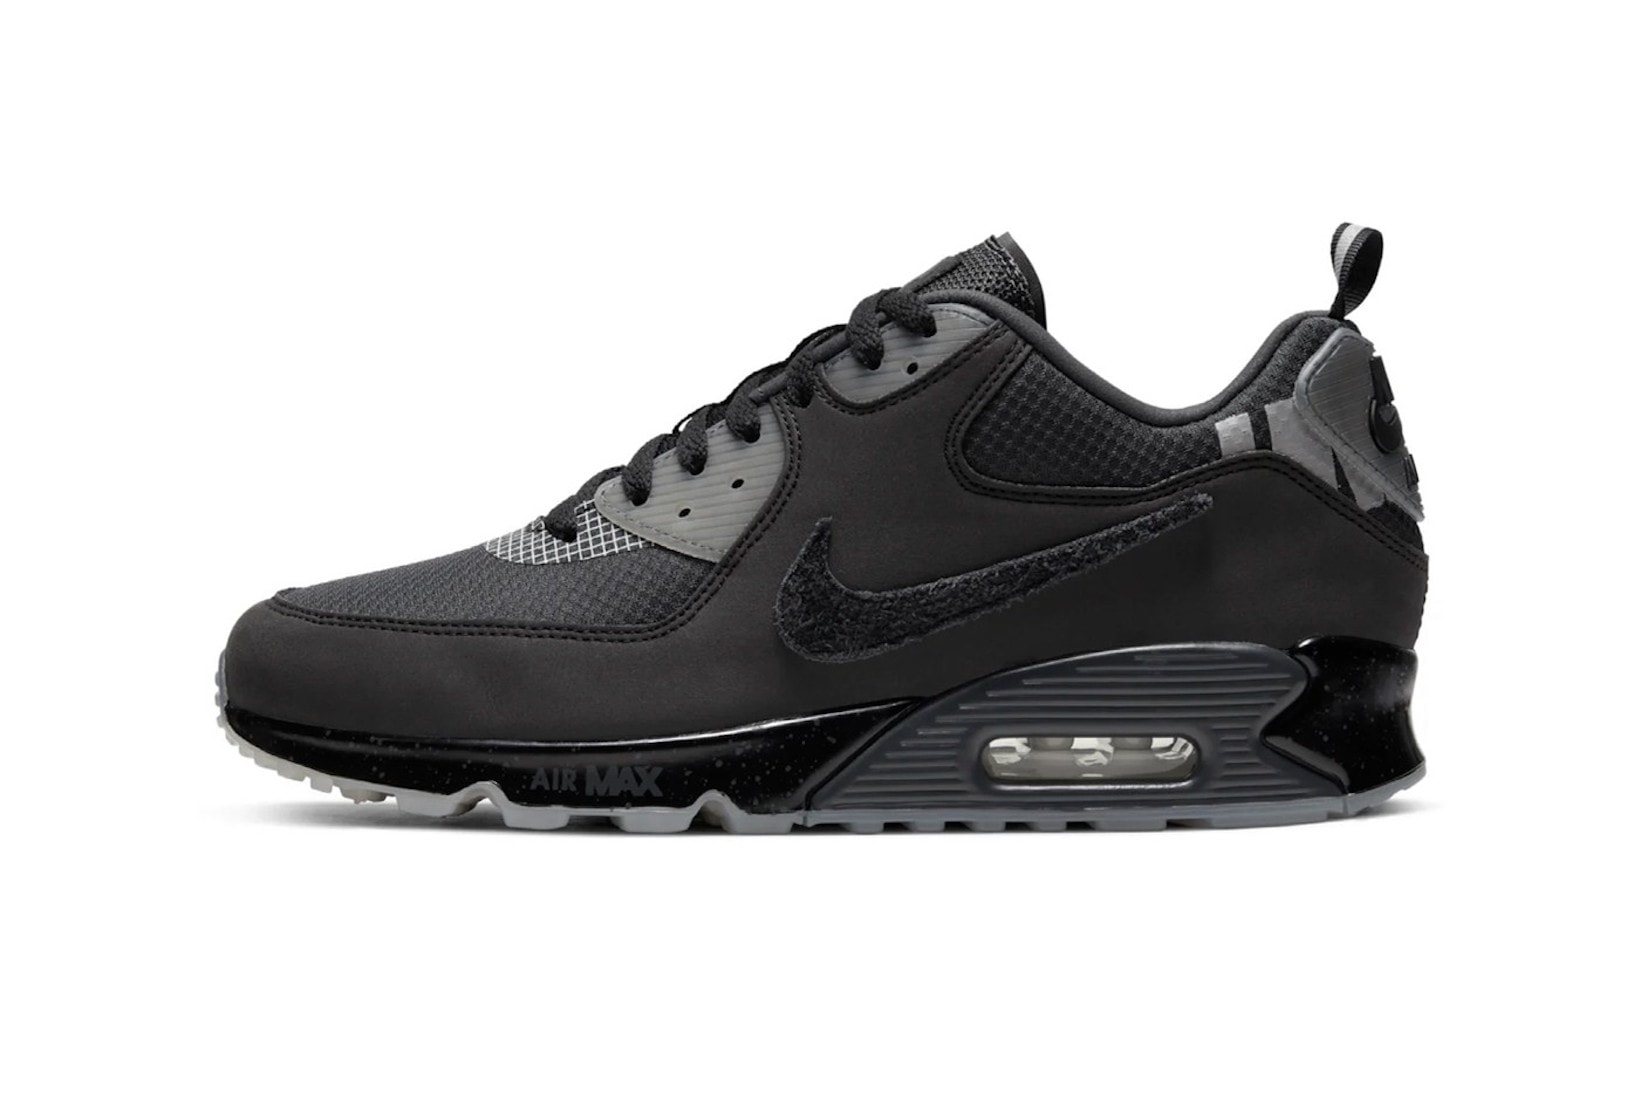 nike undefeated collaboration air max 90 sneakers black shoes footwear sneakerhead